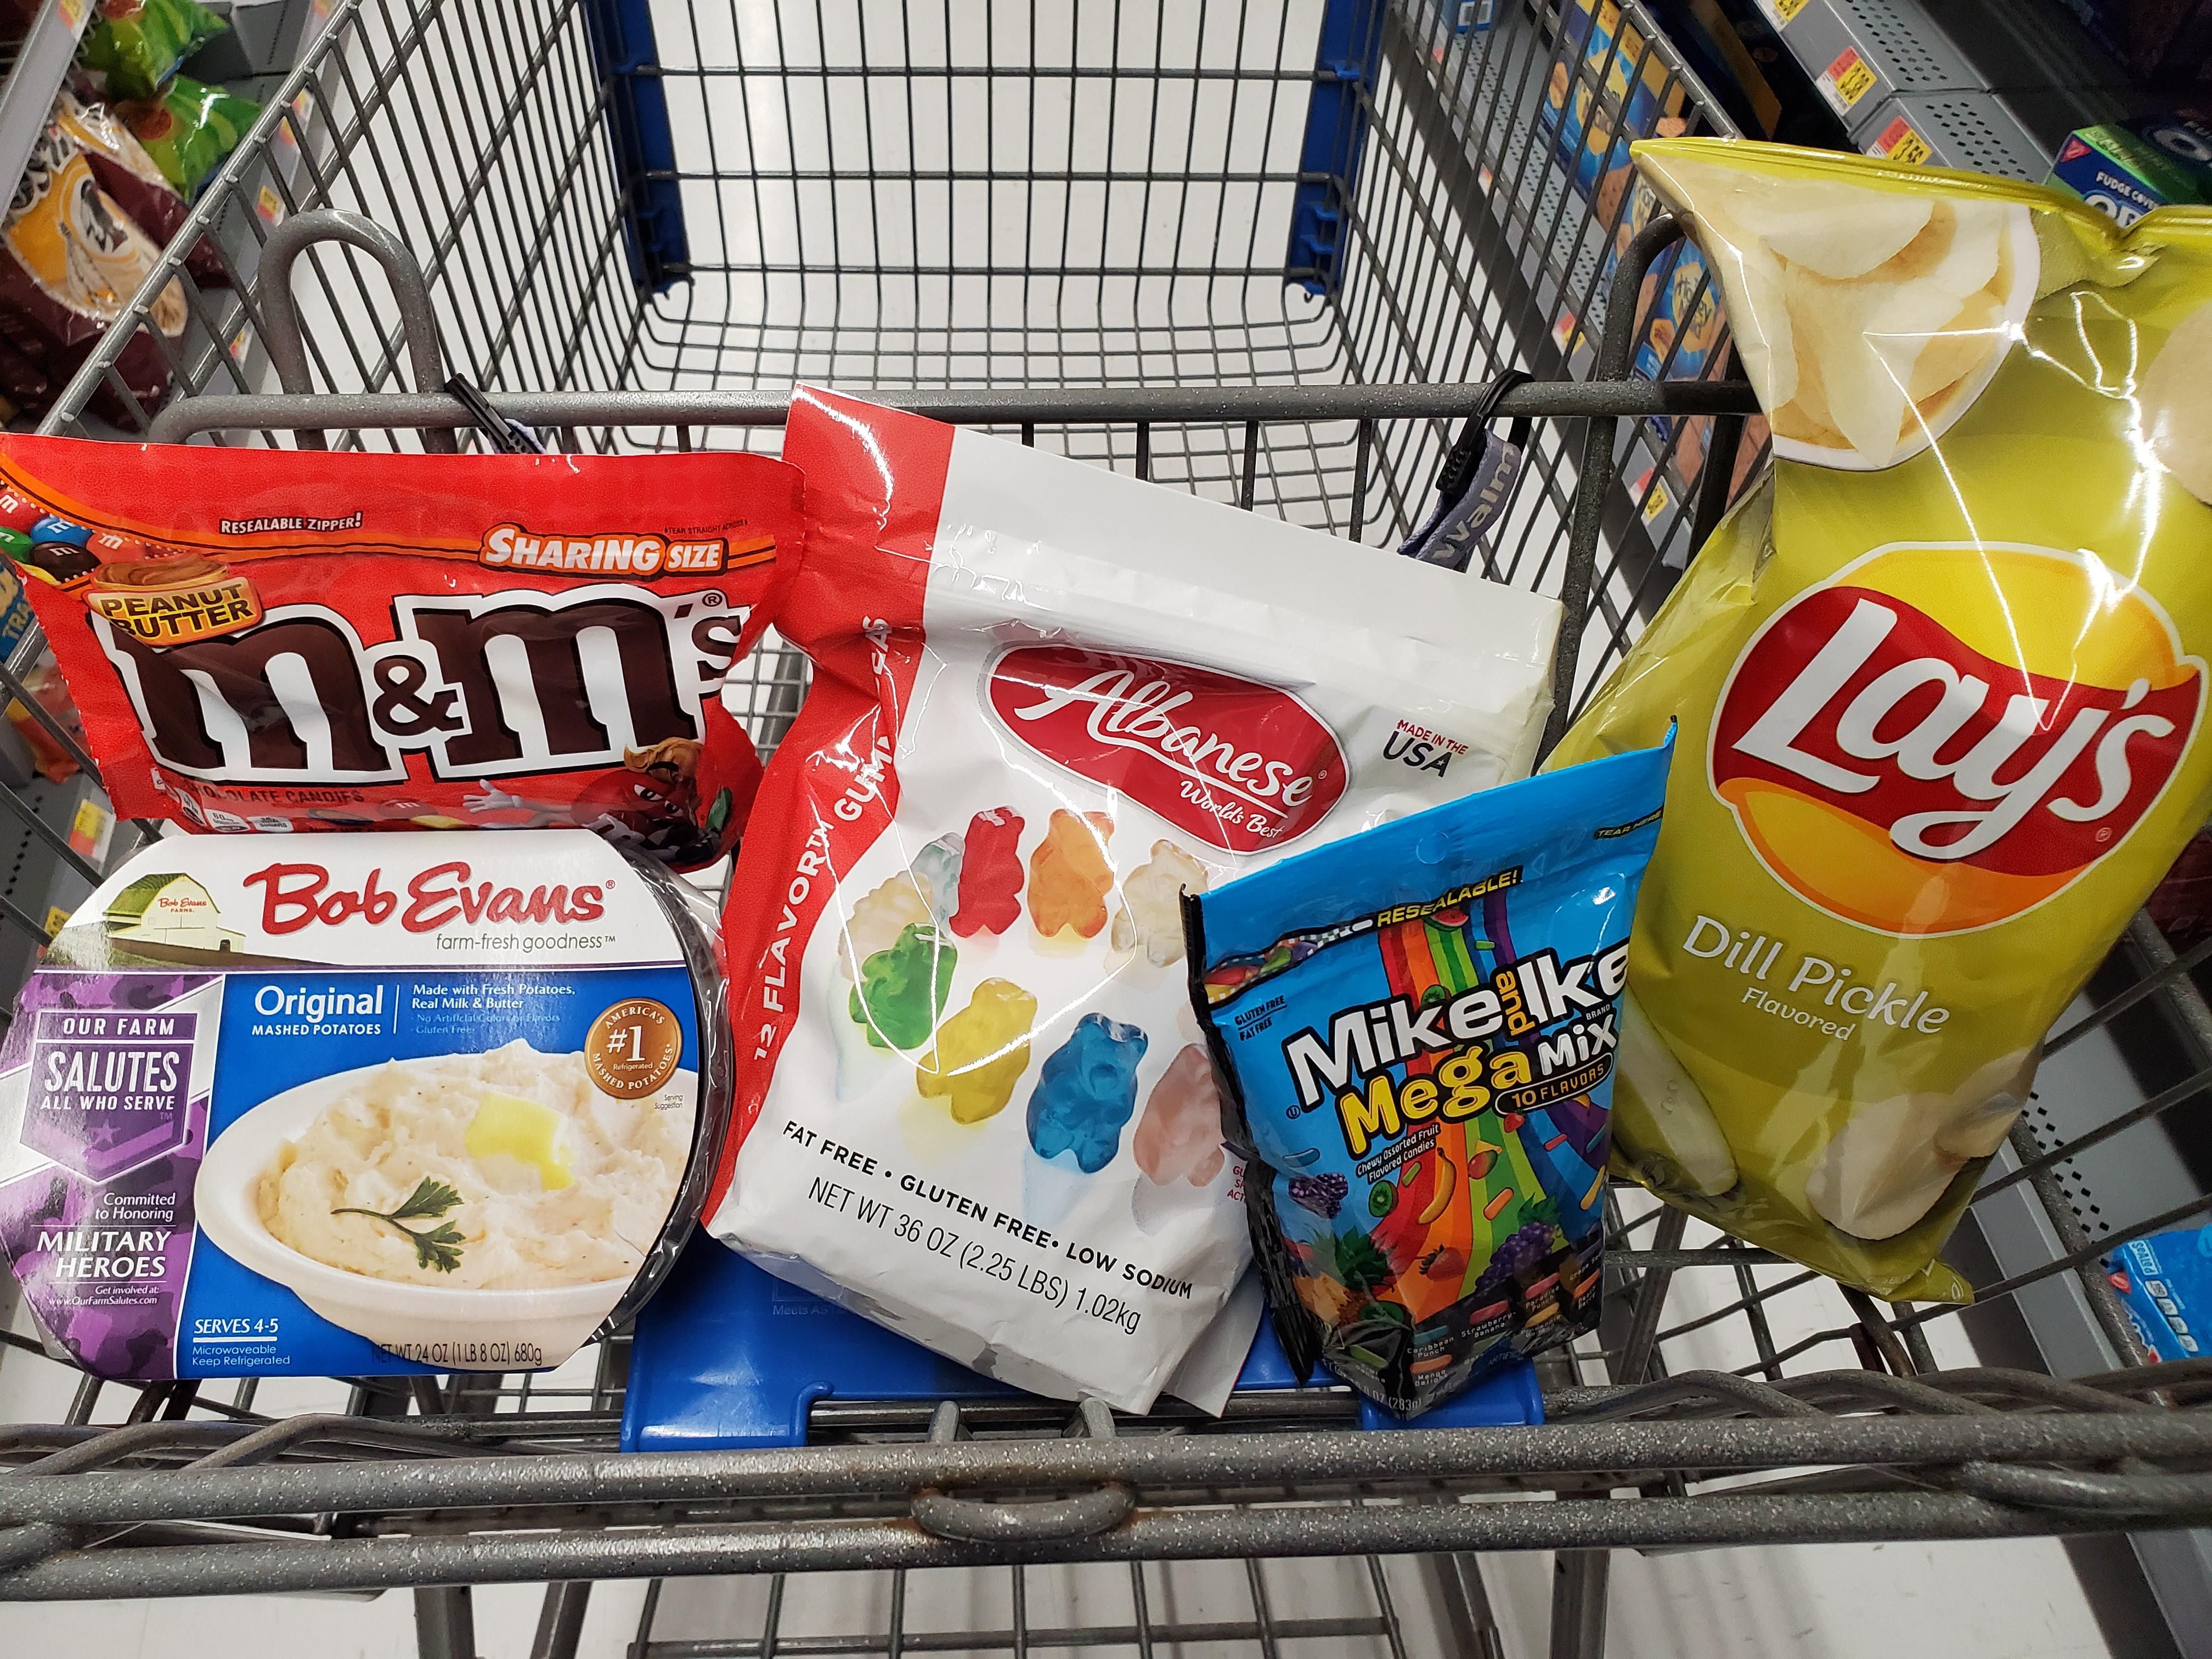 Went to buy tampons, this is what is in my cart so far.